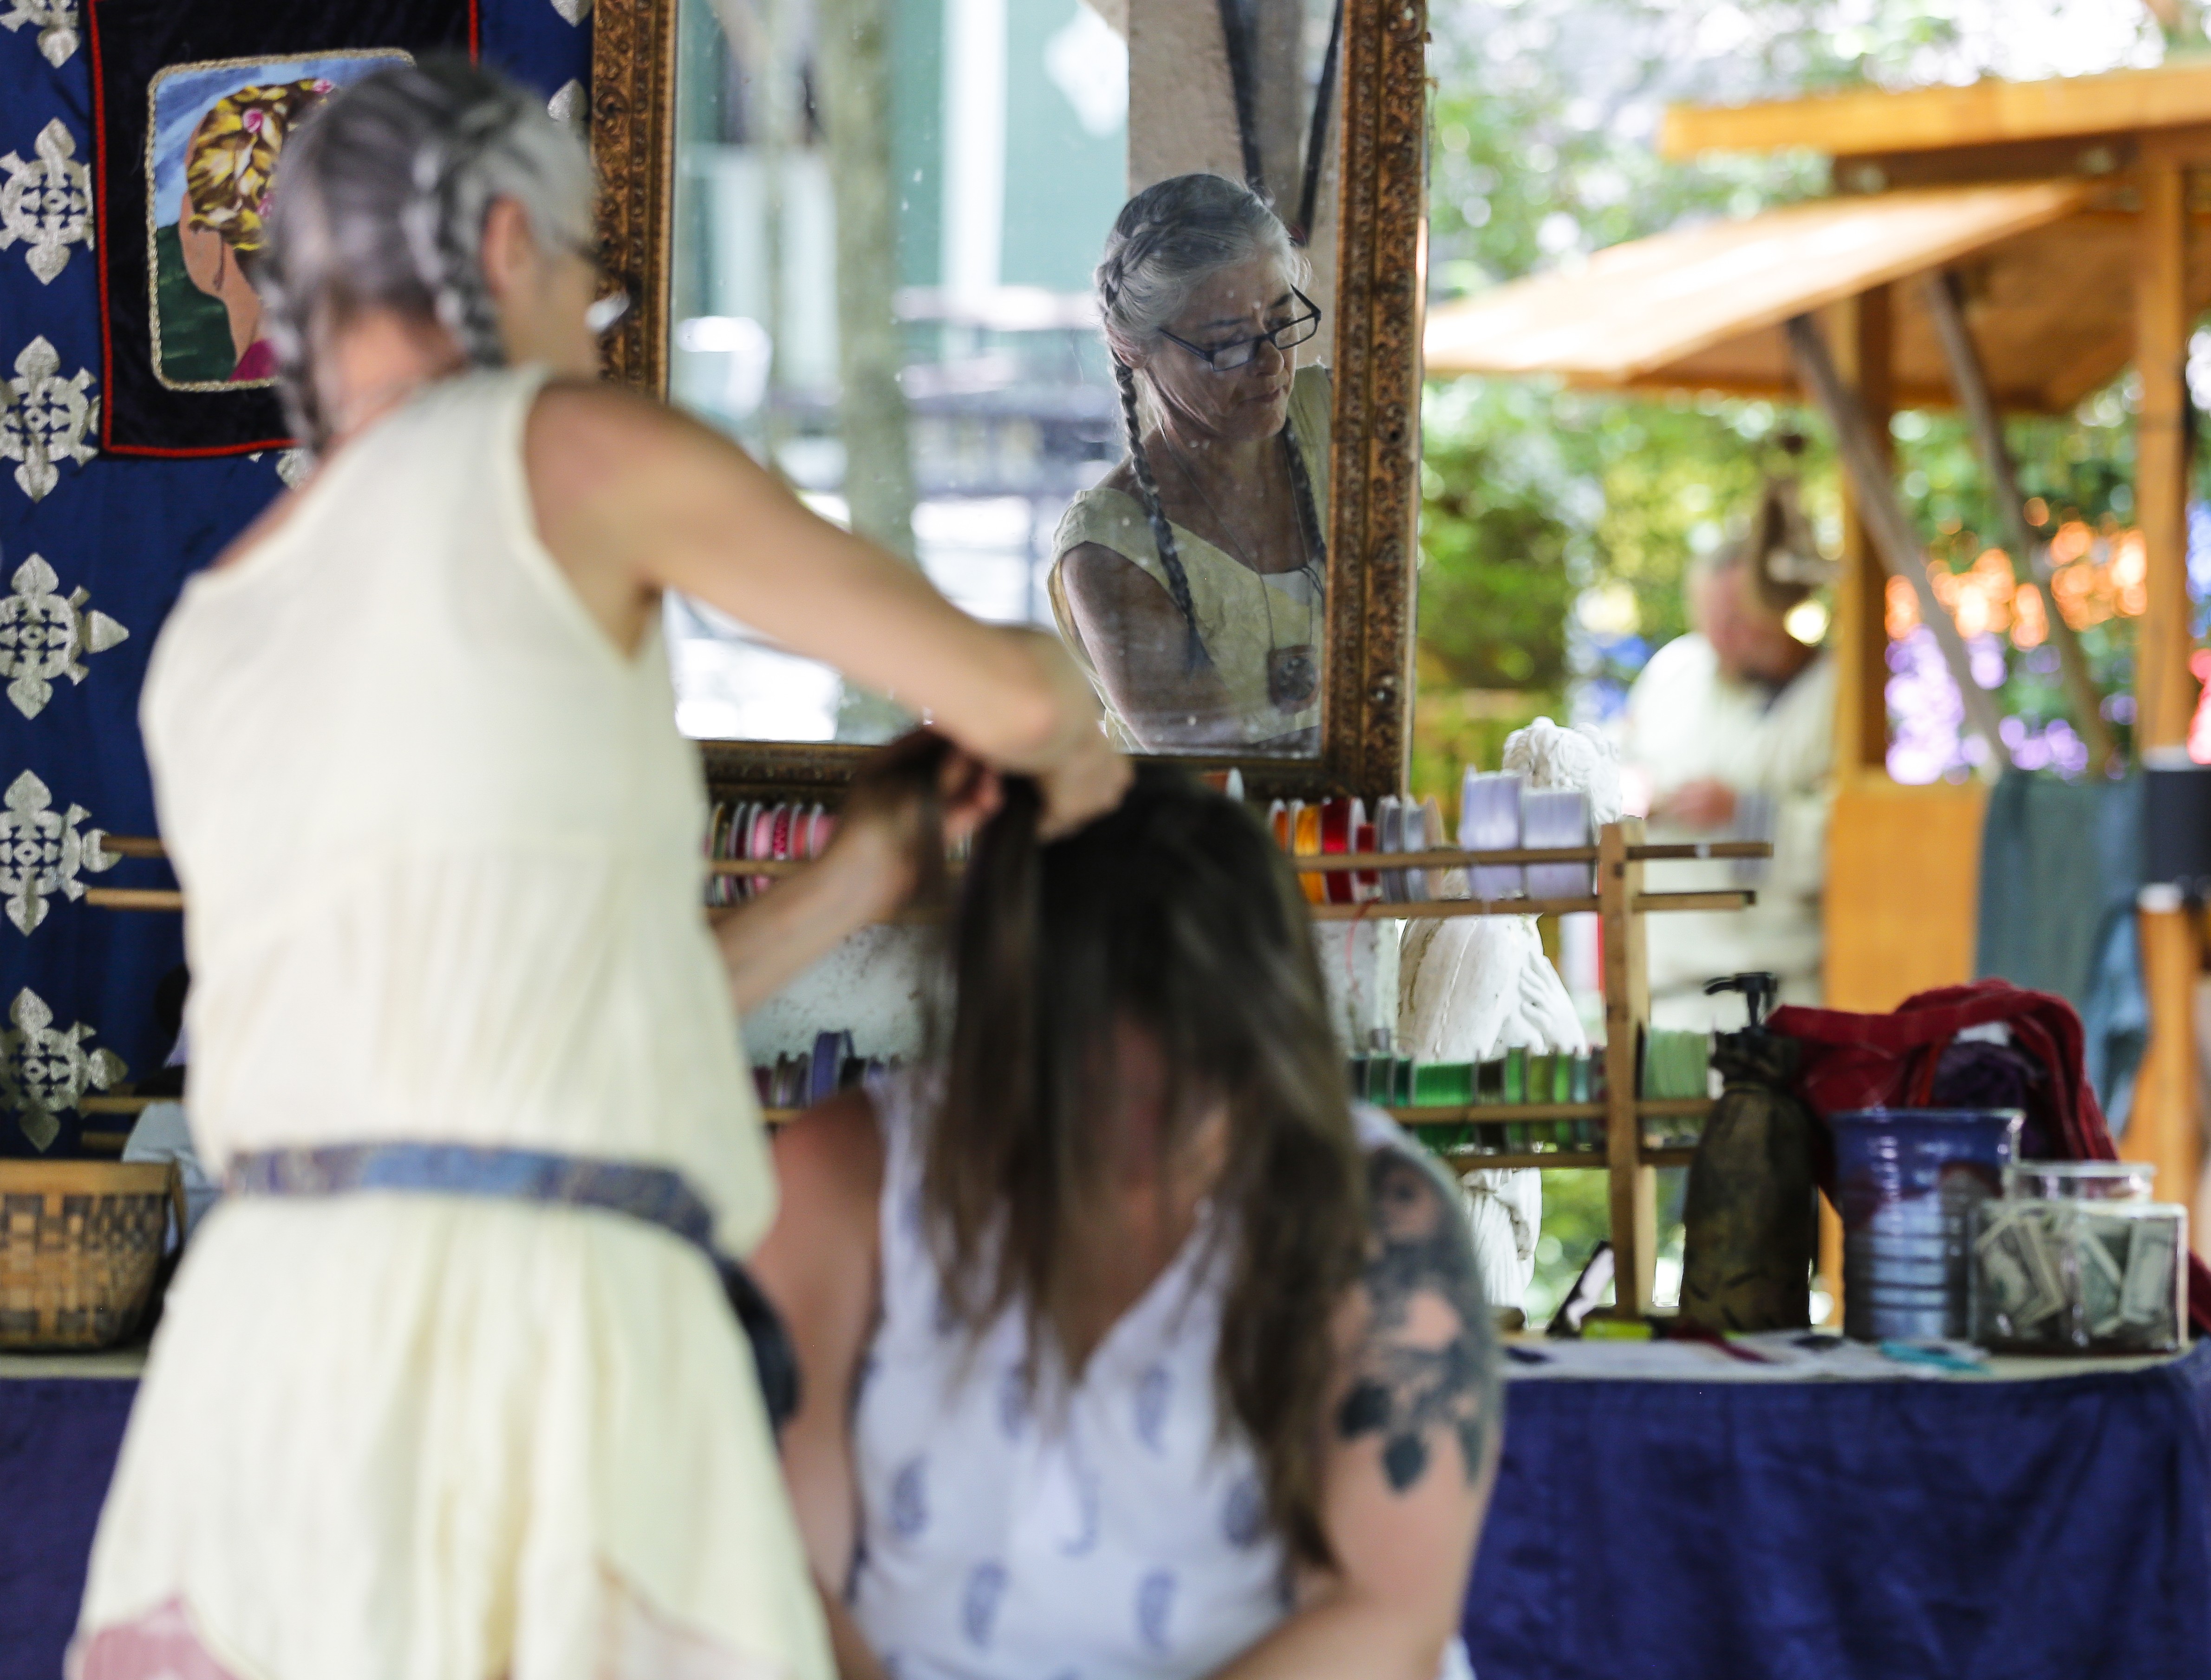 A festival goer gets her hair braided at Braided Image in the Briarwood Forrest